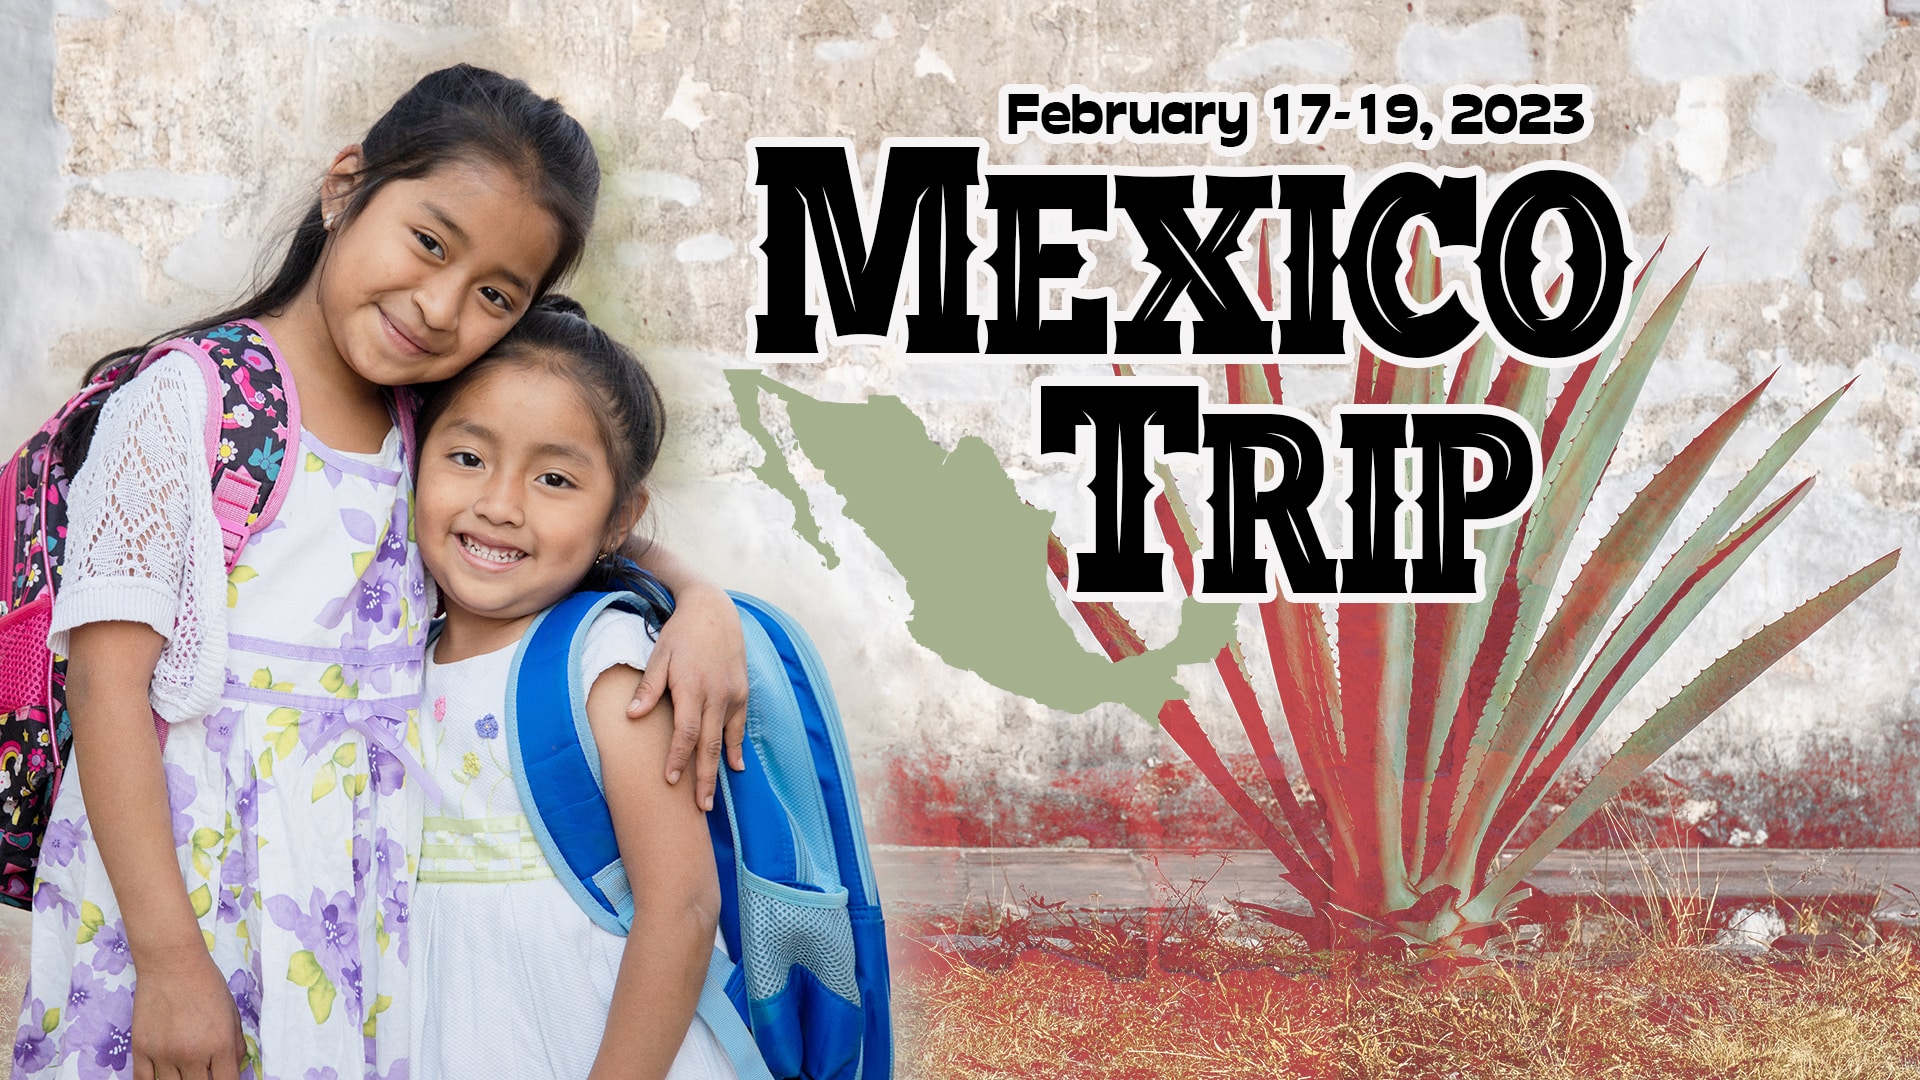 Mexico Missions Trip